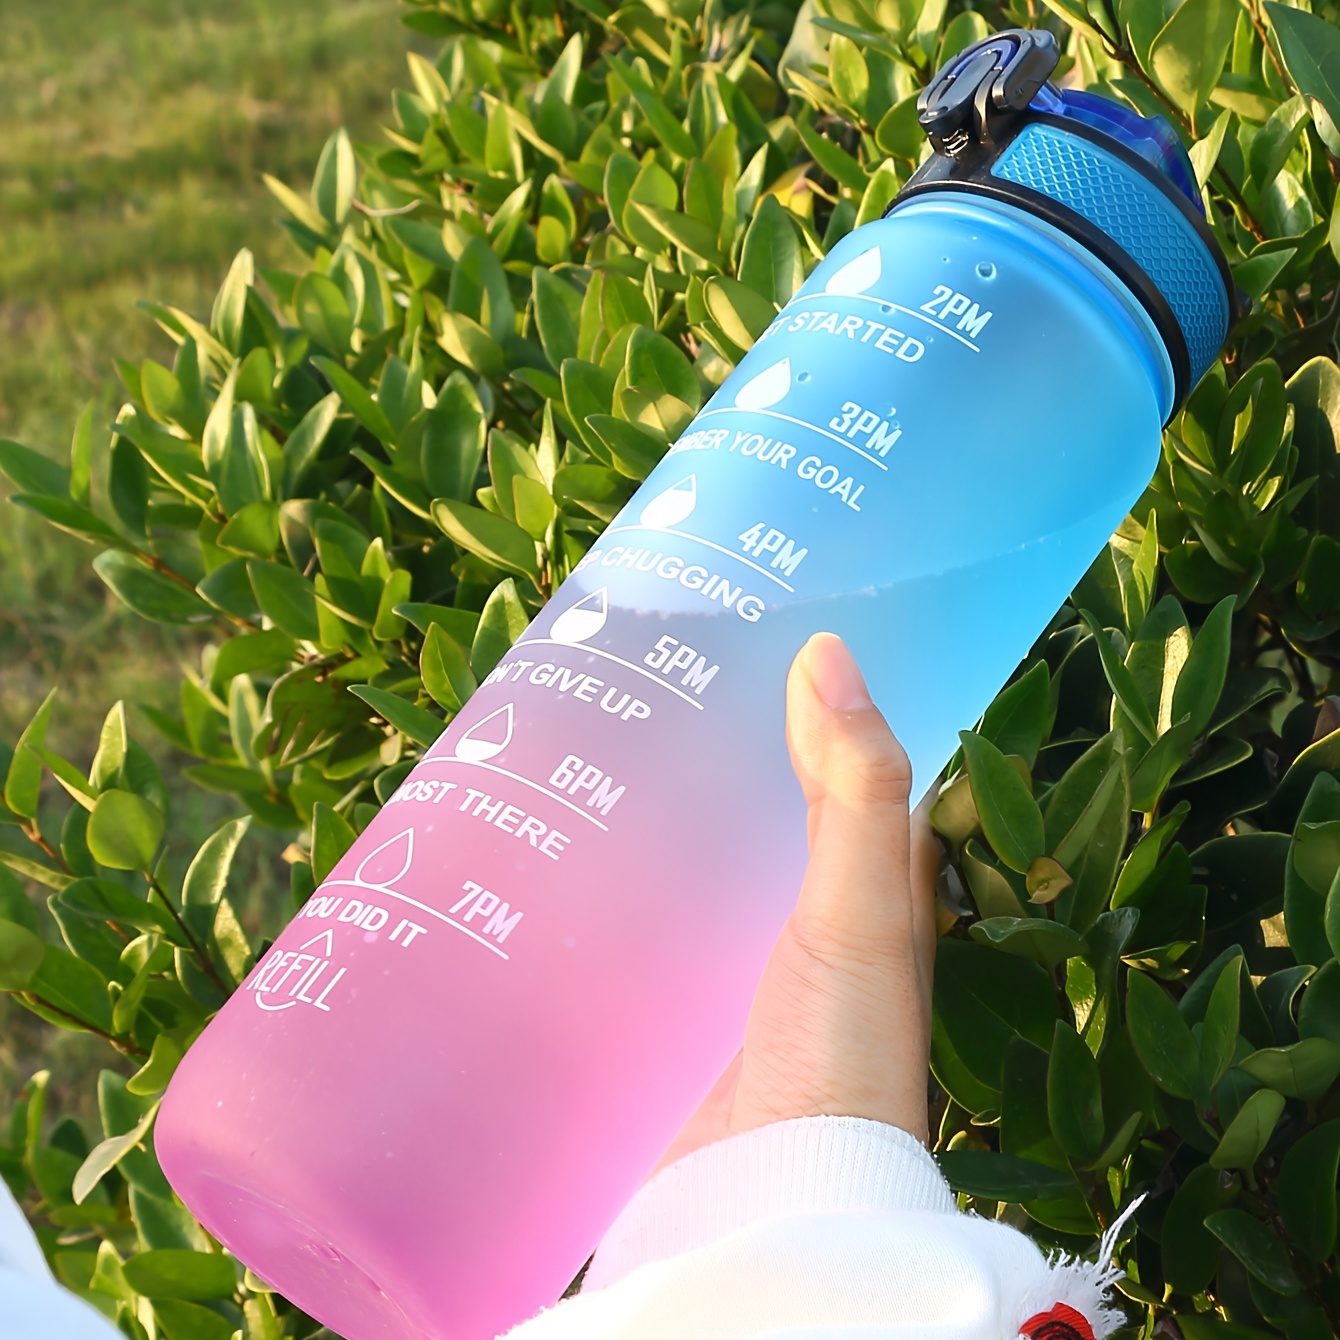 9 Plastic-Free Water Bottles For The Best Non-Toxic Hydration